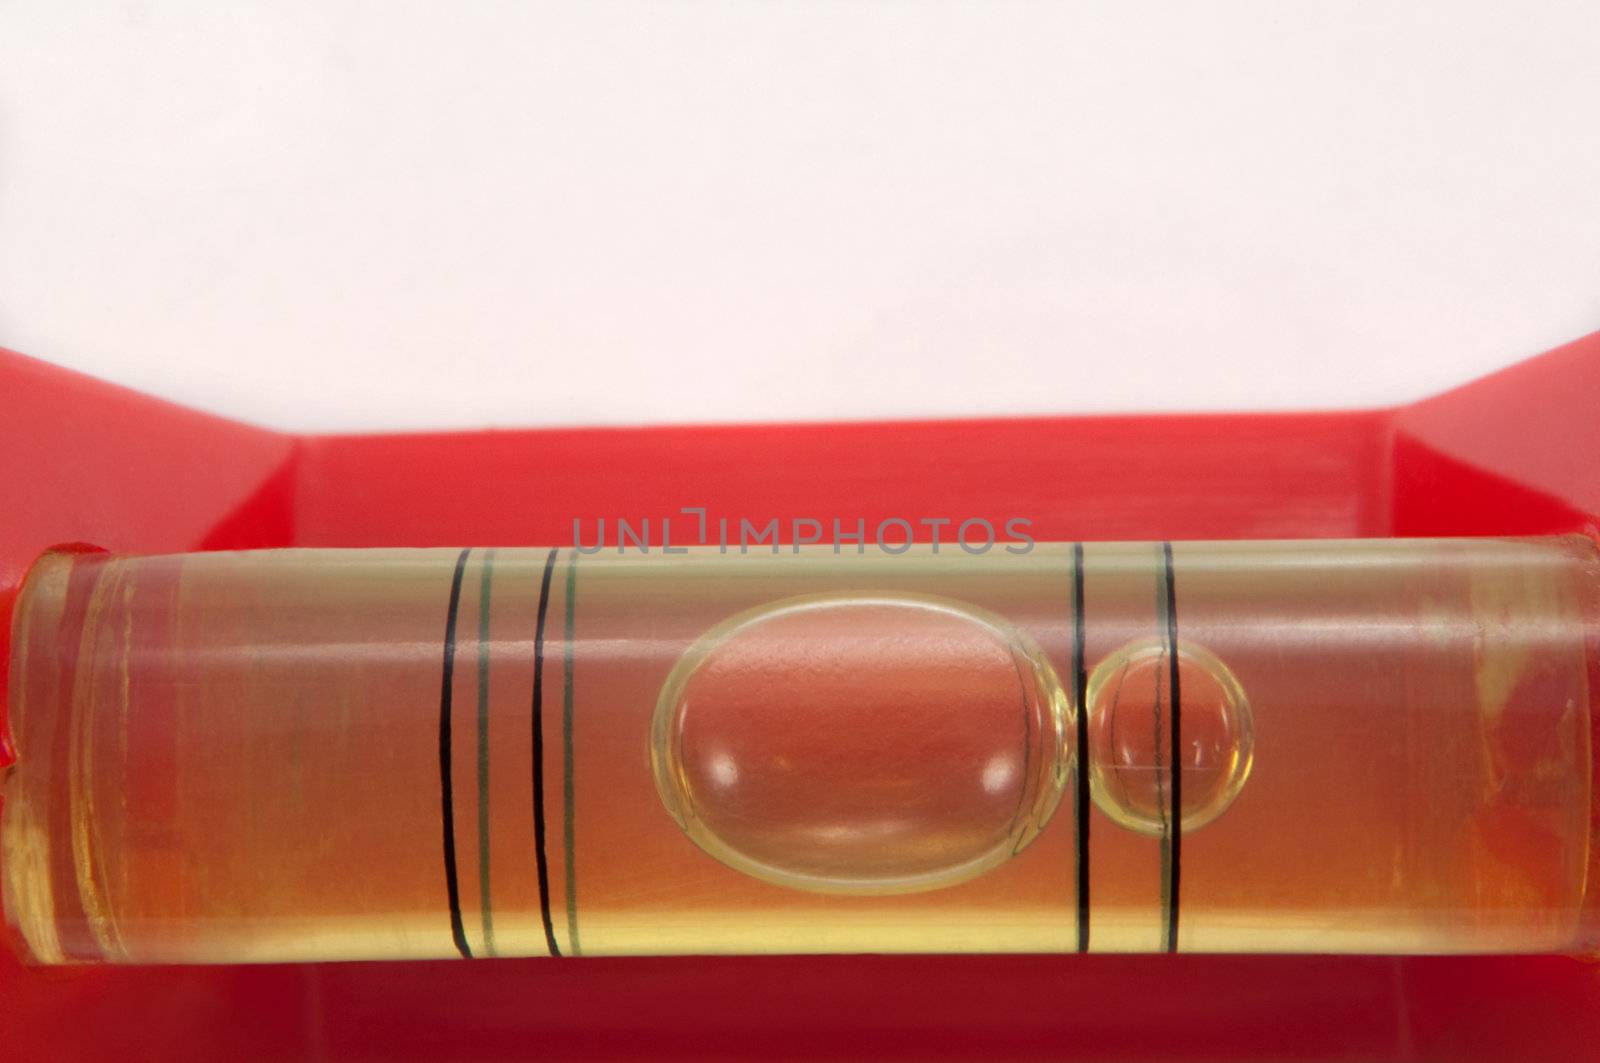 Close up of a red spirit level captured horizontally in the lower portion of the image with white above.